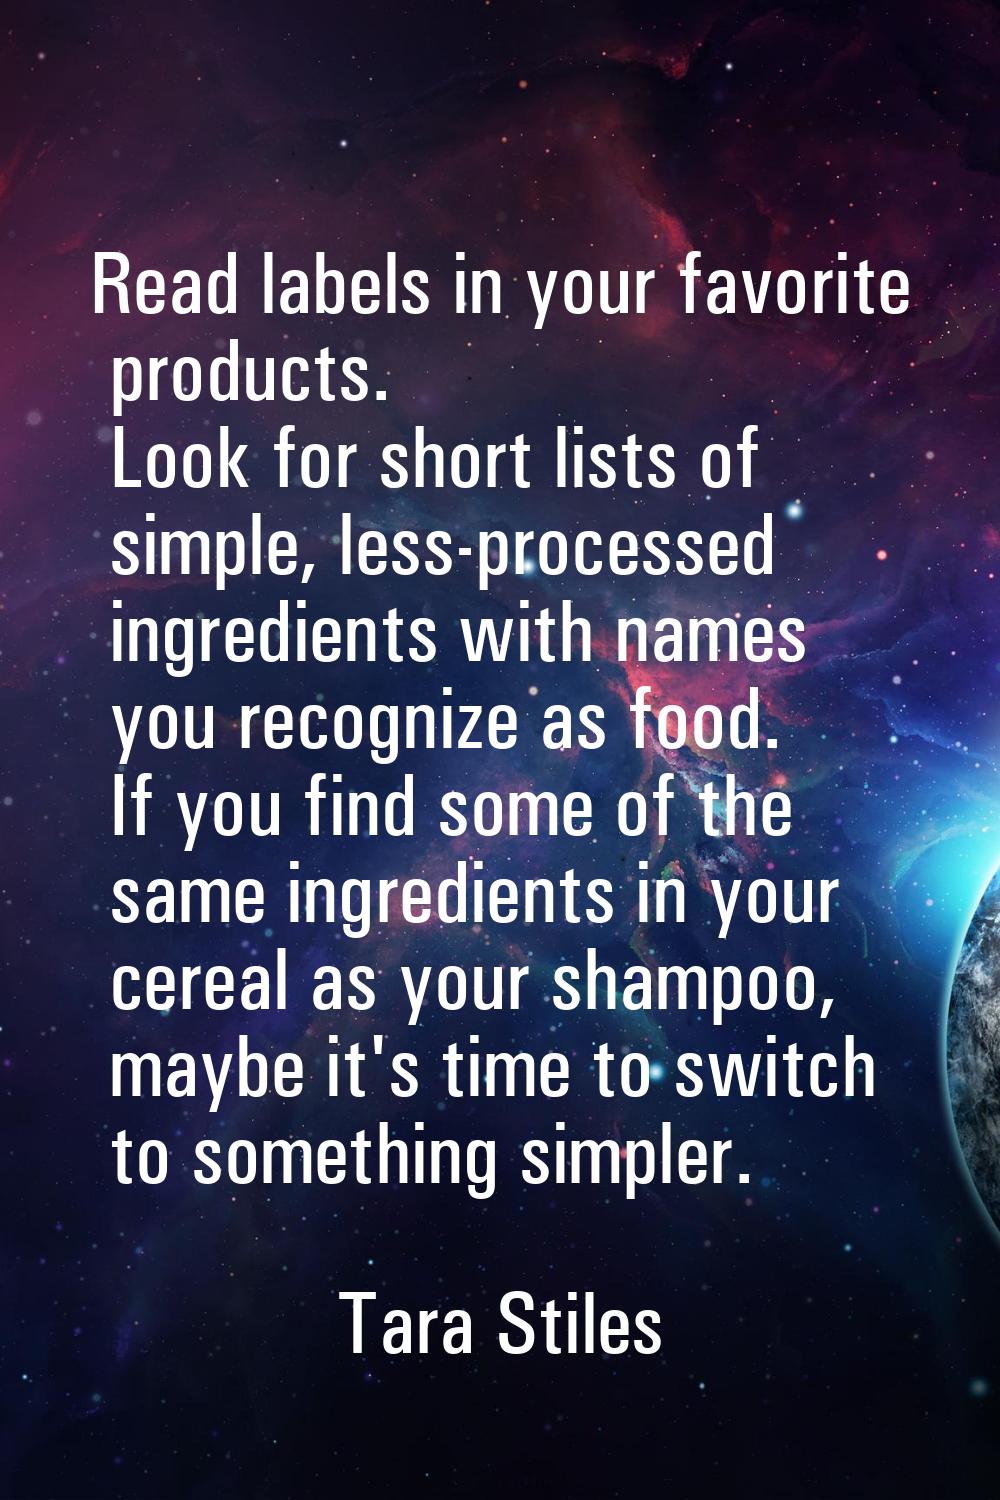 Read labels in your favorite products. Look for short lists of simple, less-processed ingredients w